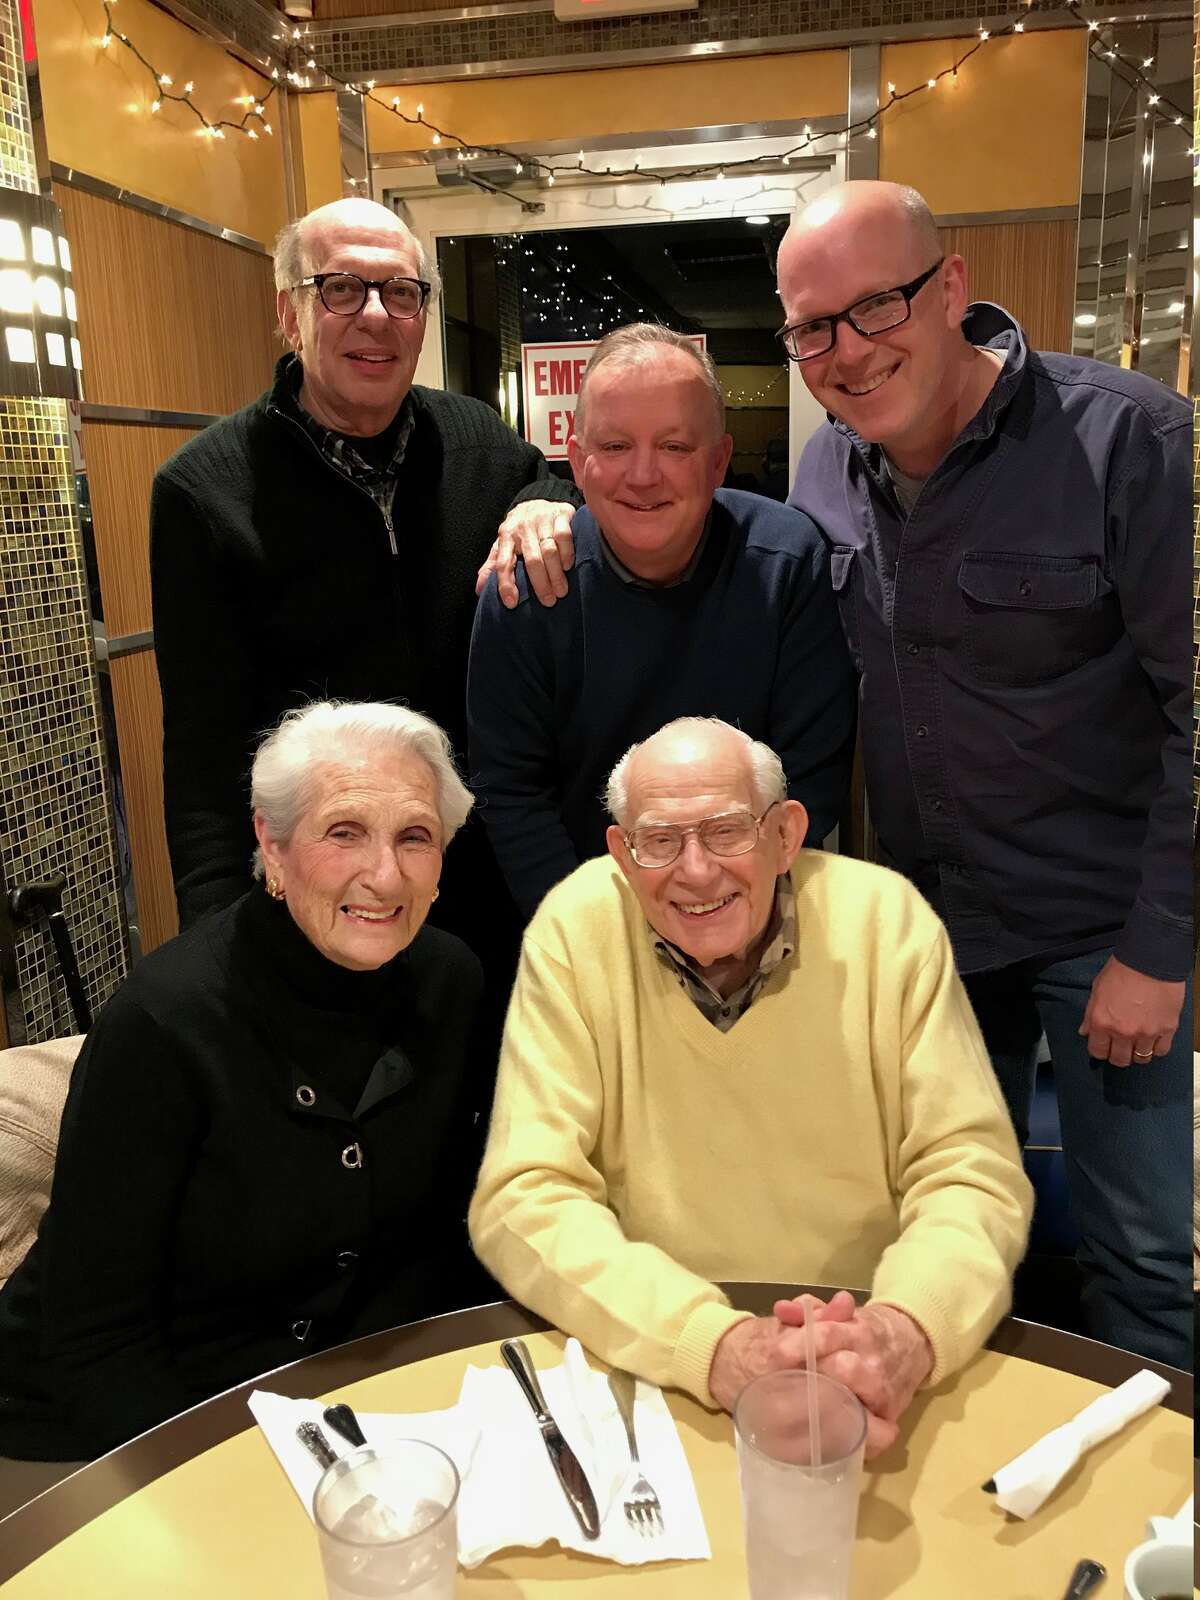 At the Capital Diner in Guilderland discussing "The Post": Anne and Harry Rosenfeld with (back row from left) Rob Brill, Paul Grondahl and Casey Seiler.